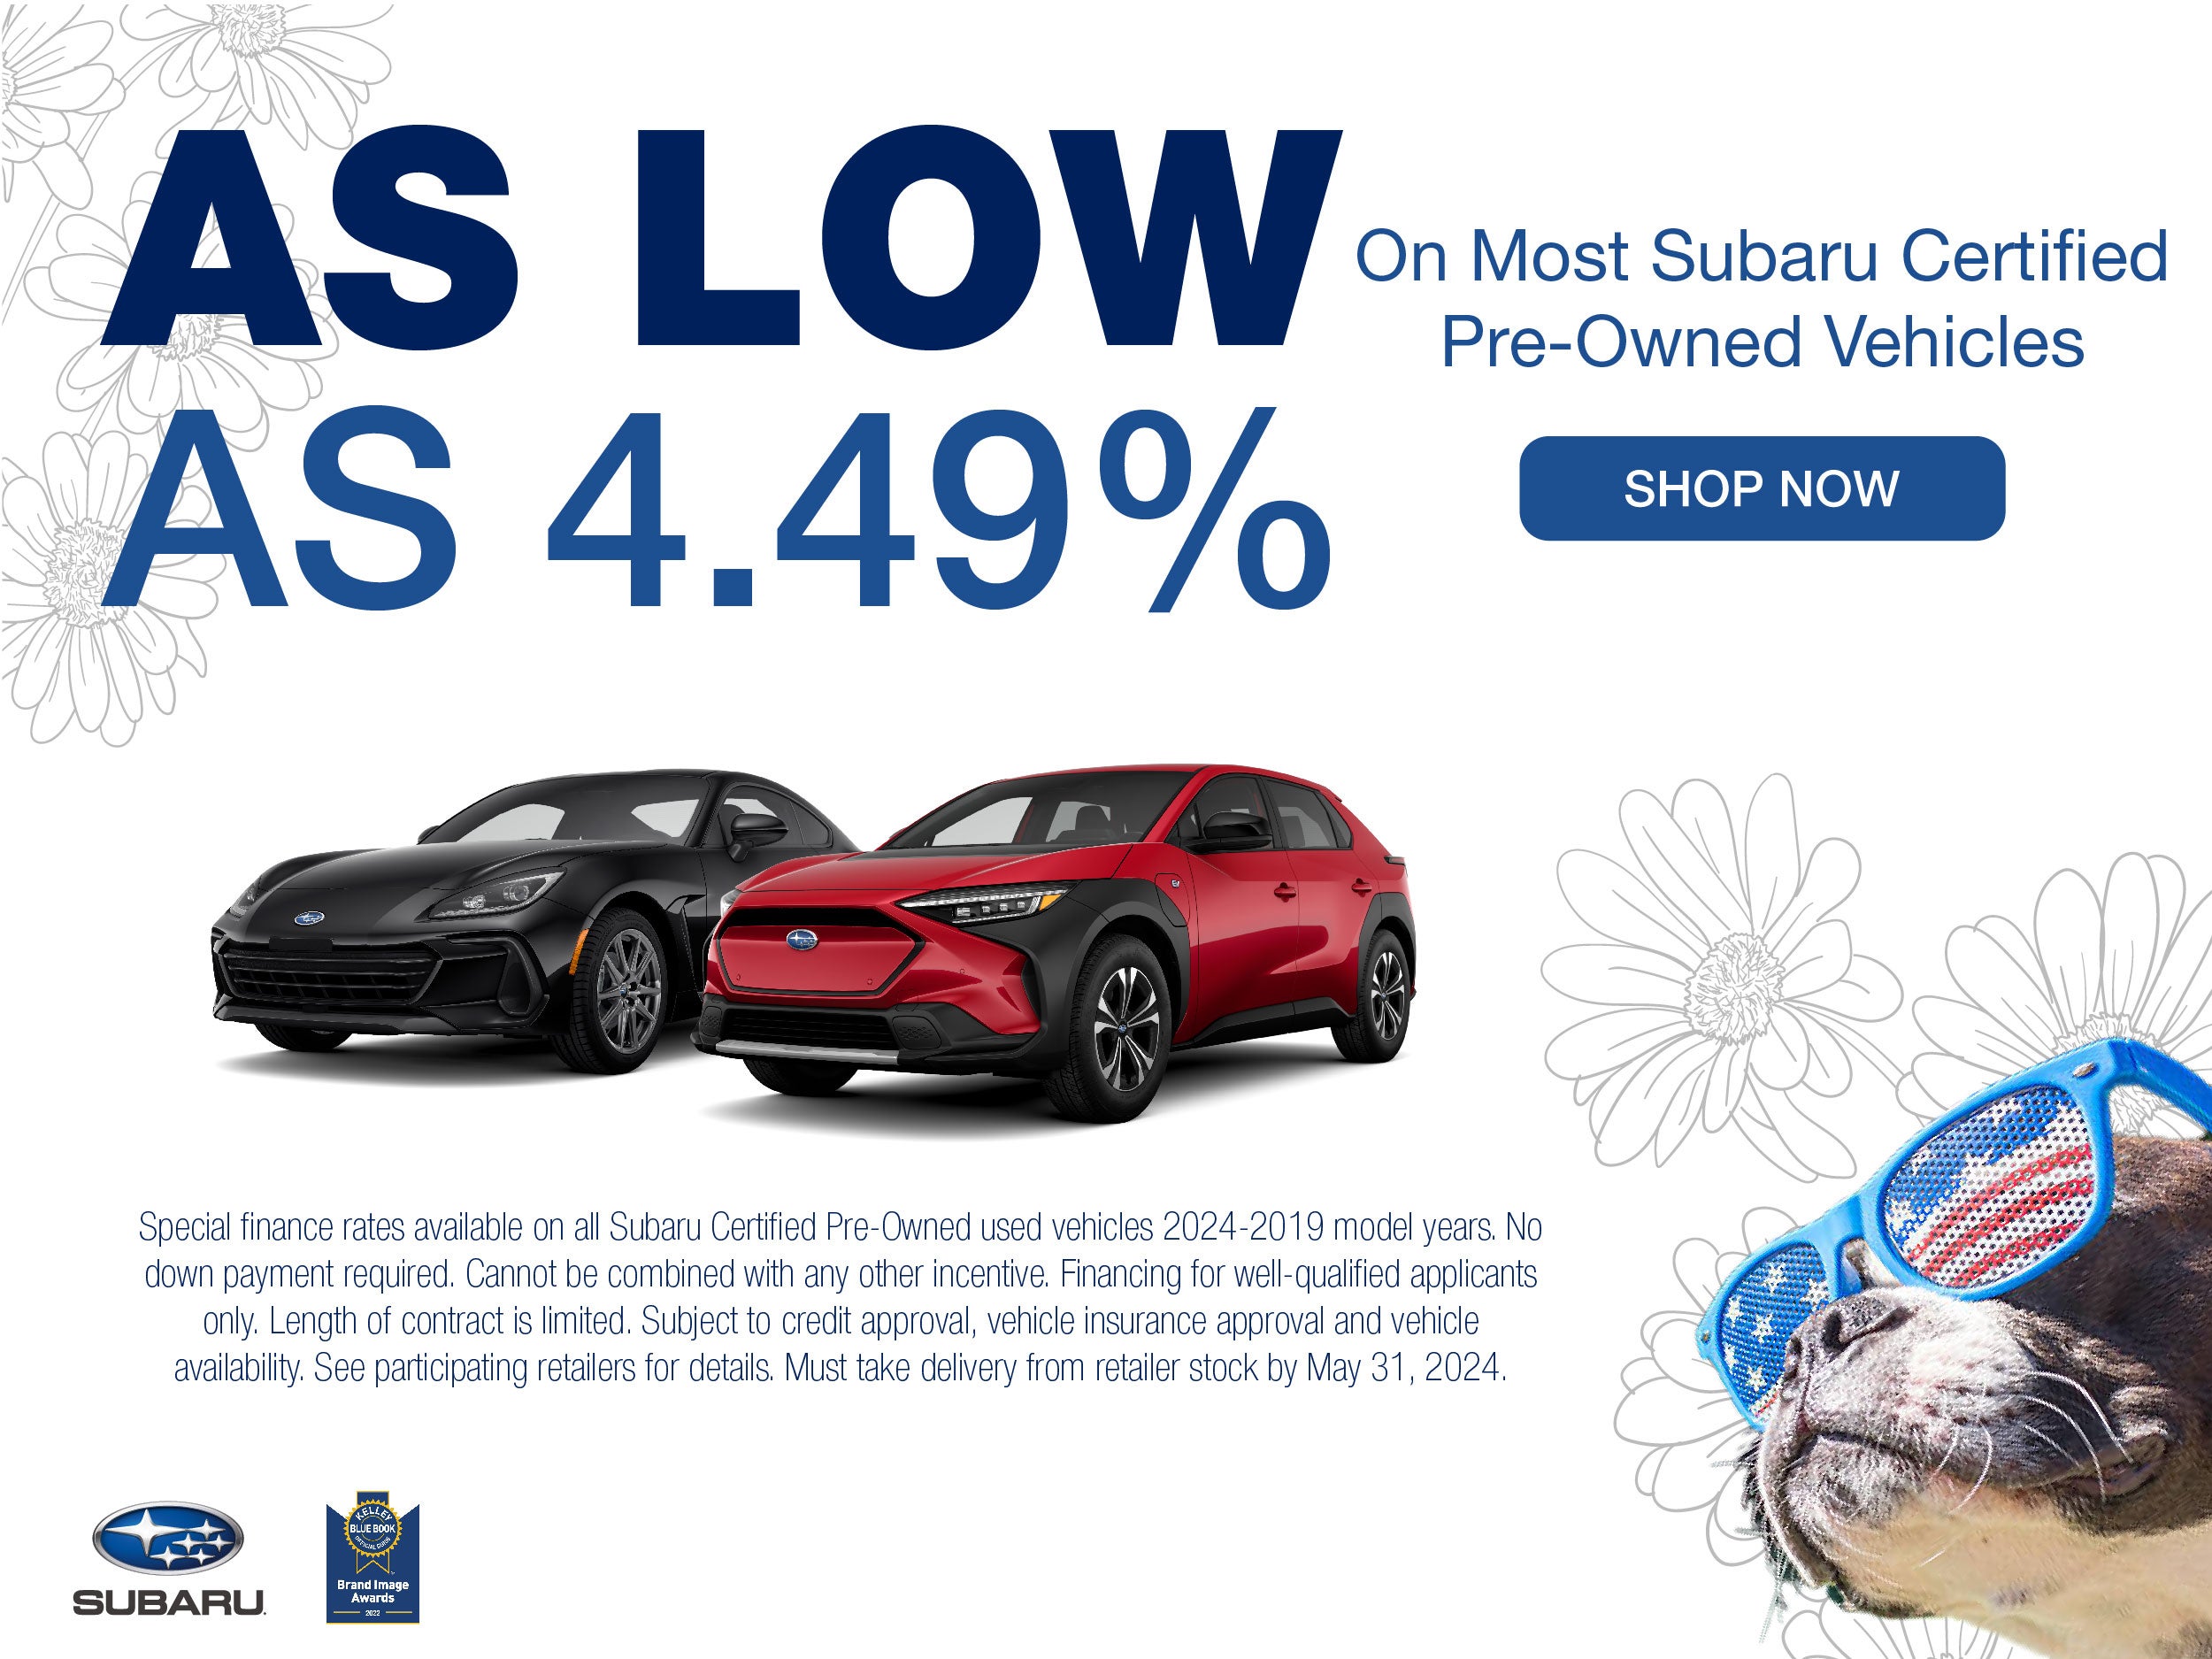 4.49%_APR_Pre-Owned_Vehicles